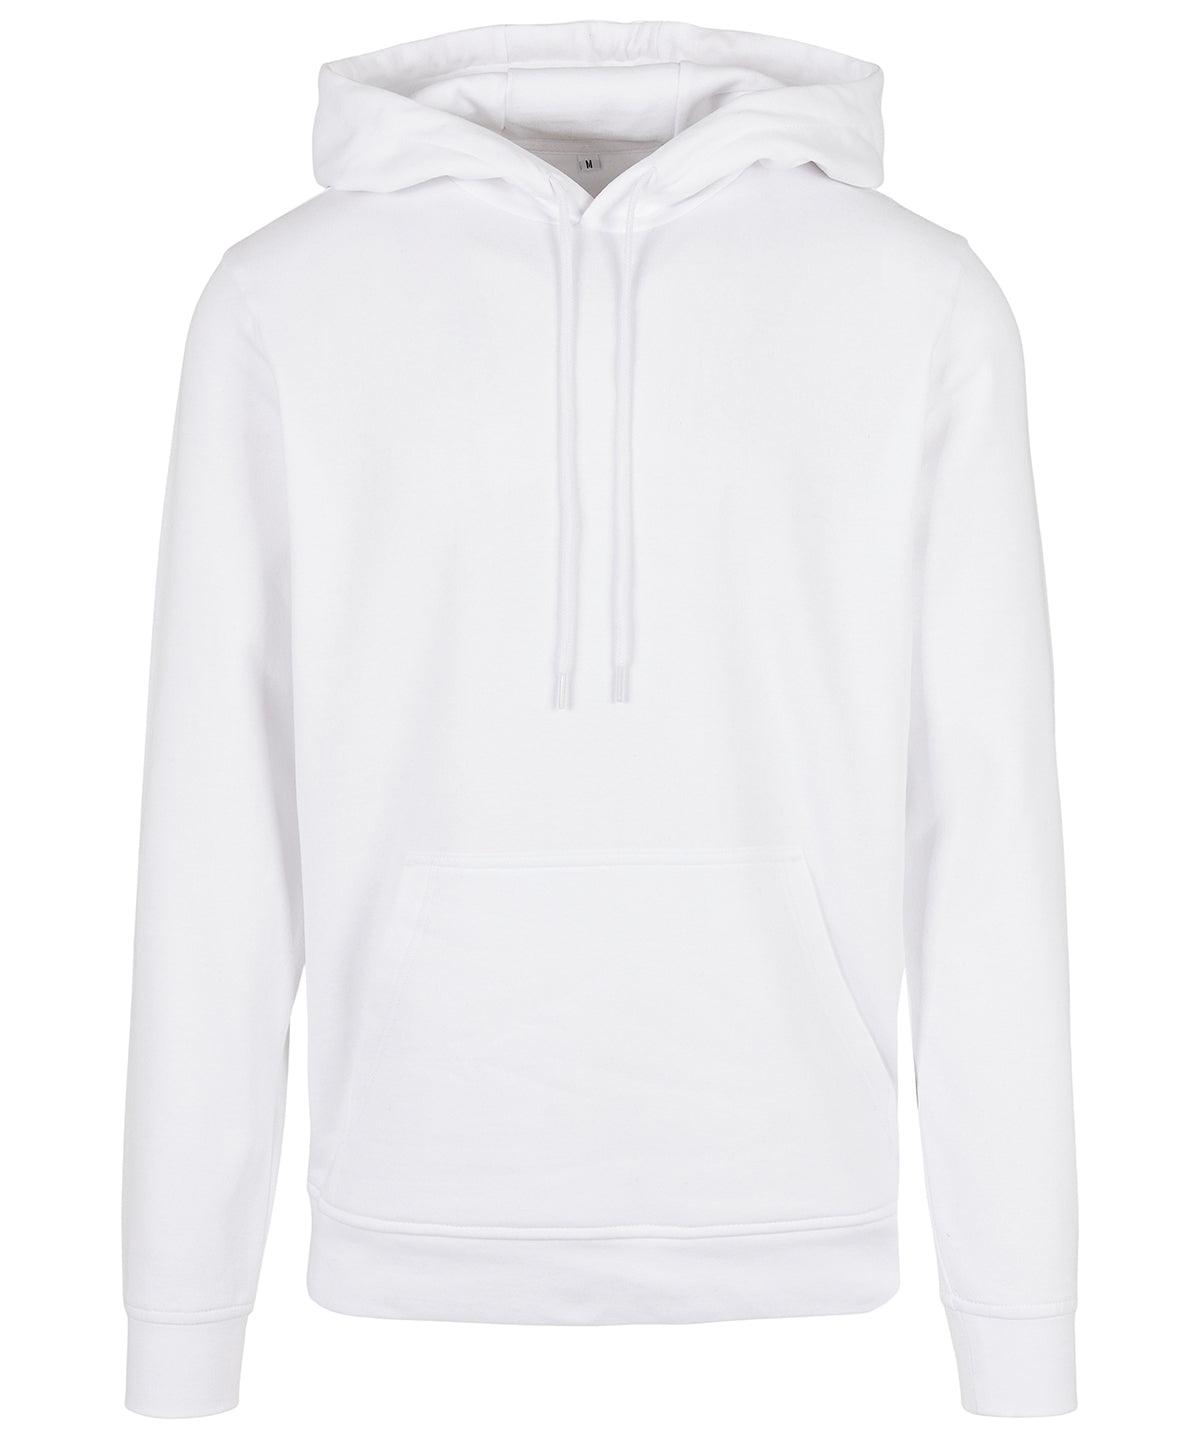 White - Basic hoodie Hoodies Build Your Brand Basic Co-ords, Freshers Week, Hoodies, Lounge Sets, New For 2021, New Styles For 2021, Plus Sizes, Rebrandable, Trending Schoolwear Centres